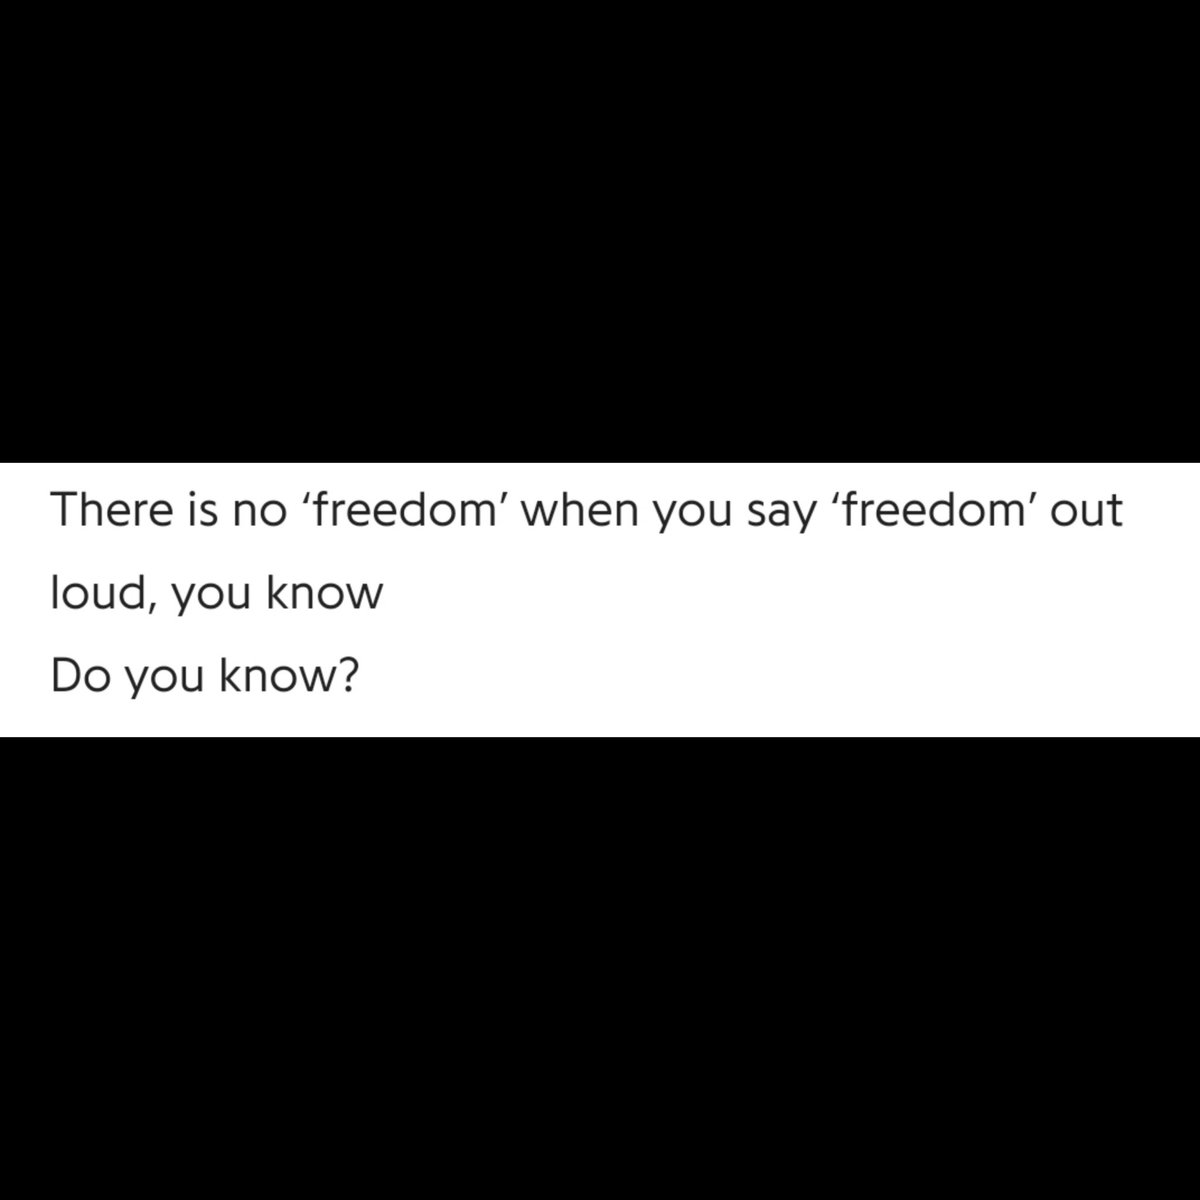 "freedom" but why? Ofc if we had "freedom" in our lives we would not have to mention the word itself, after all why would we shout about a necessity we rightfully own, as Joon goes, "there is no "freedom" when you say "freedom" out loud, you know". Gentle reminder that this song+